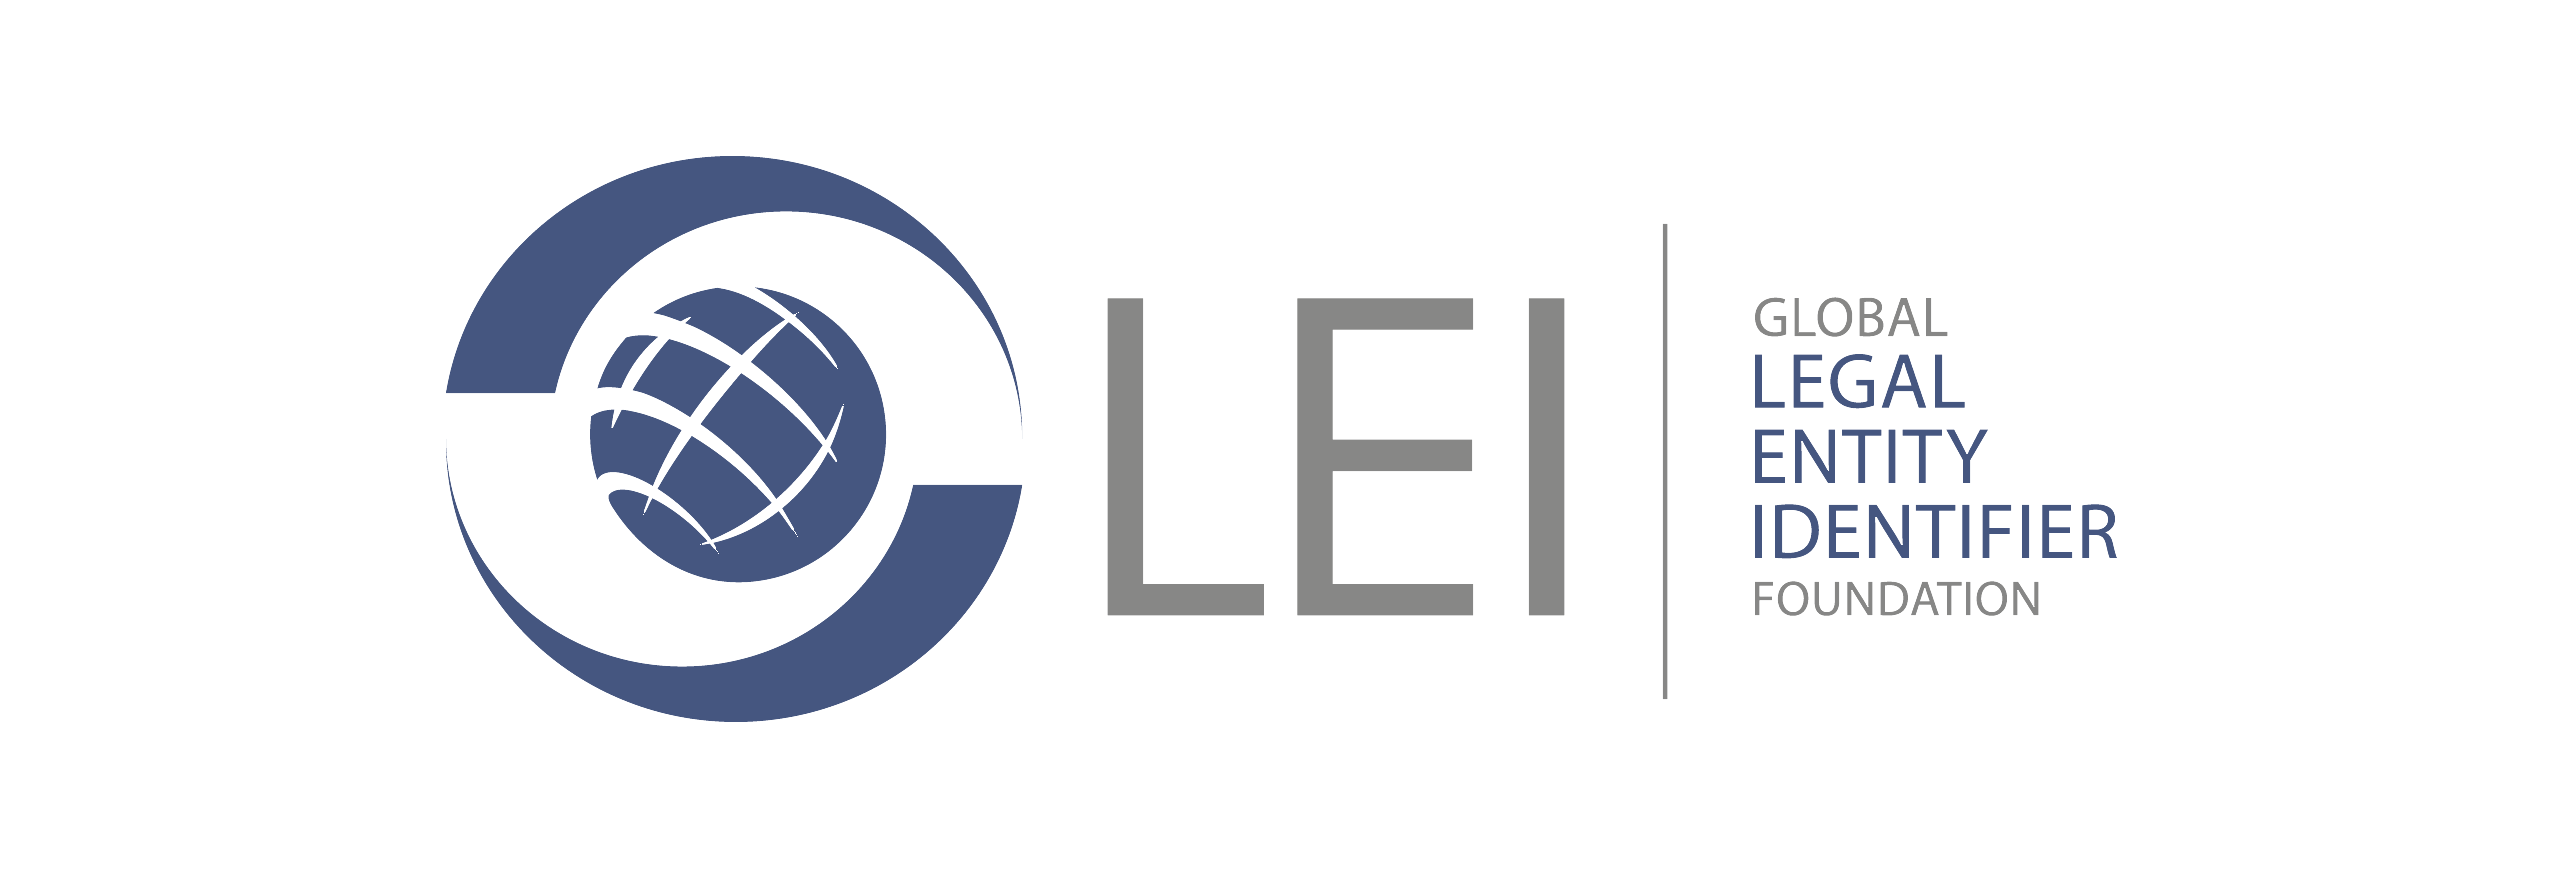 GLEIF Answers Industry Demand for Customized, Automated Access to Rich LEI Data with LEI Search 2.0 and Companion API